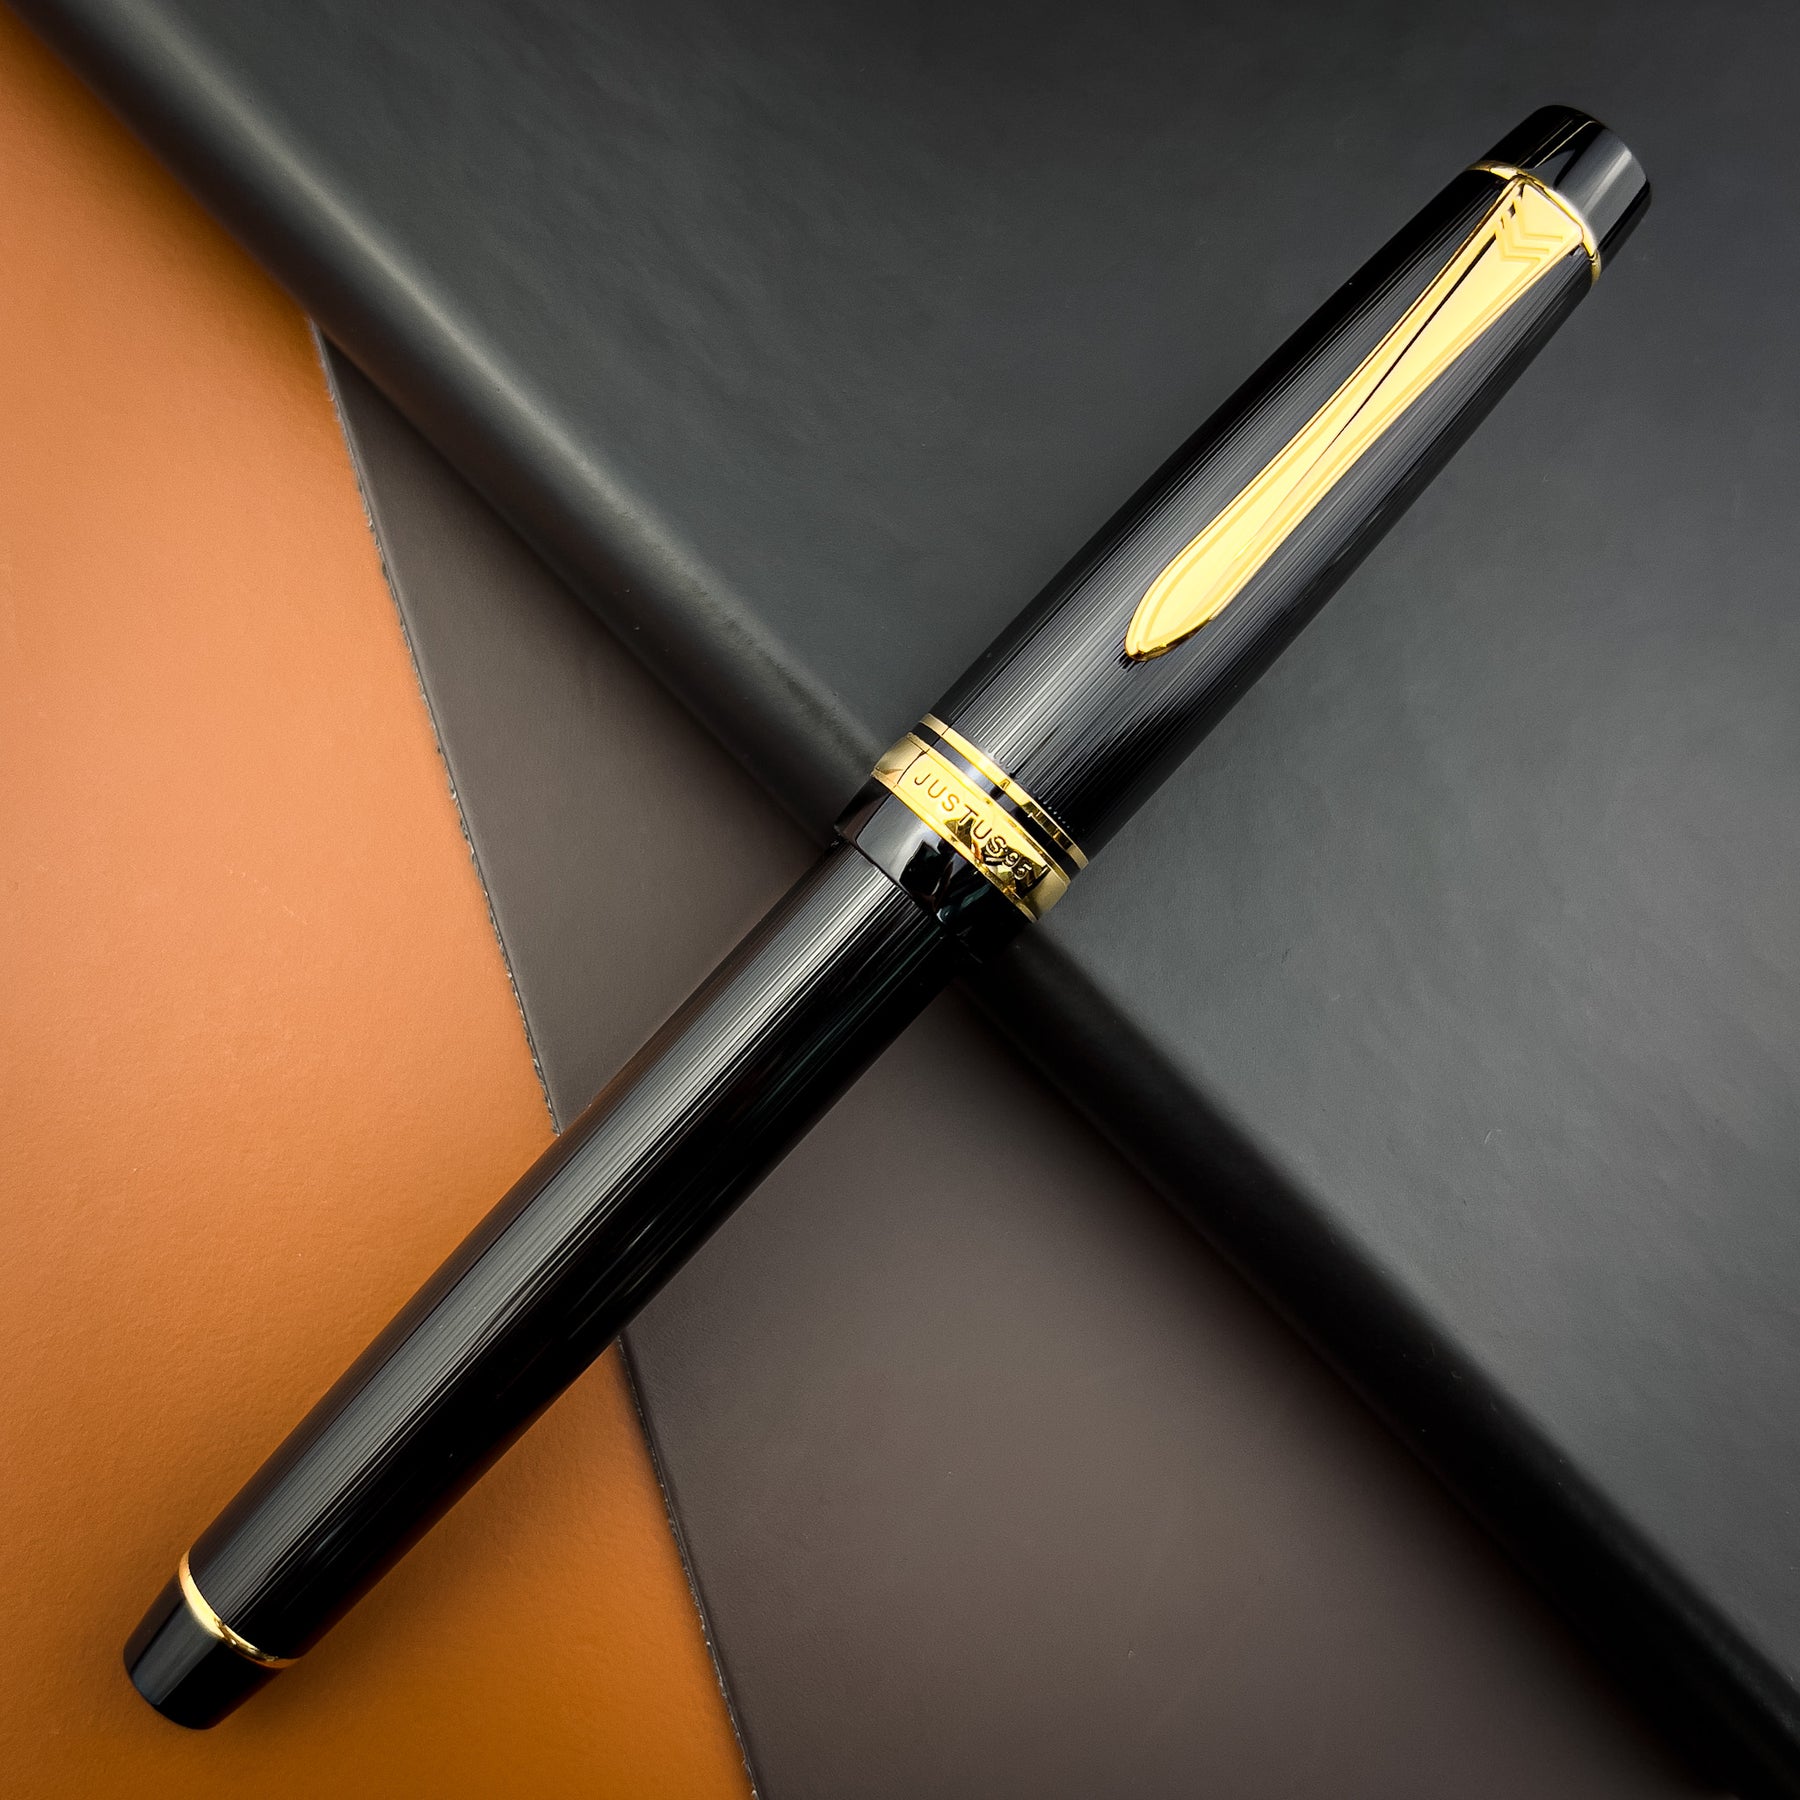 Fine) Pilot Justus 95 Black Resin Fountain Pen with Gold Accents 14-Kara  その他事務用品